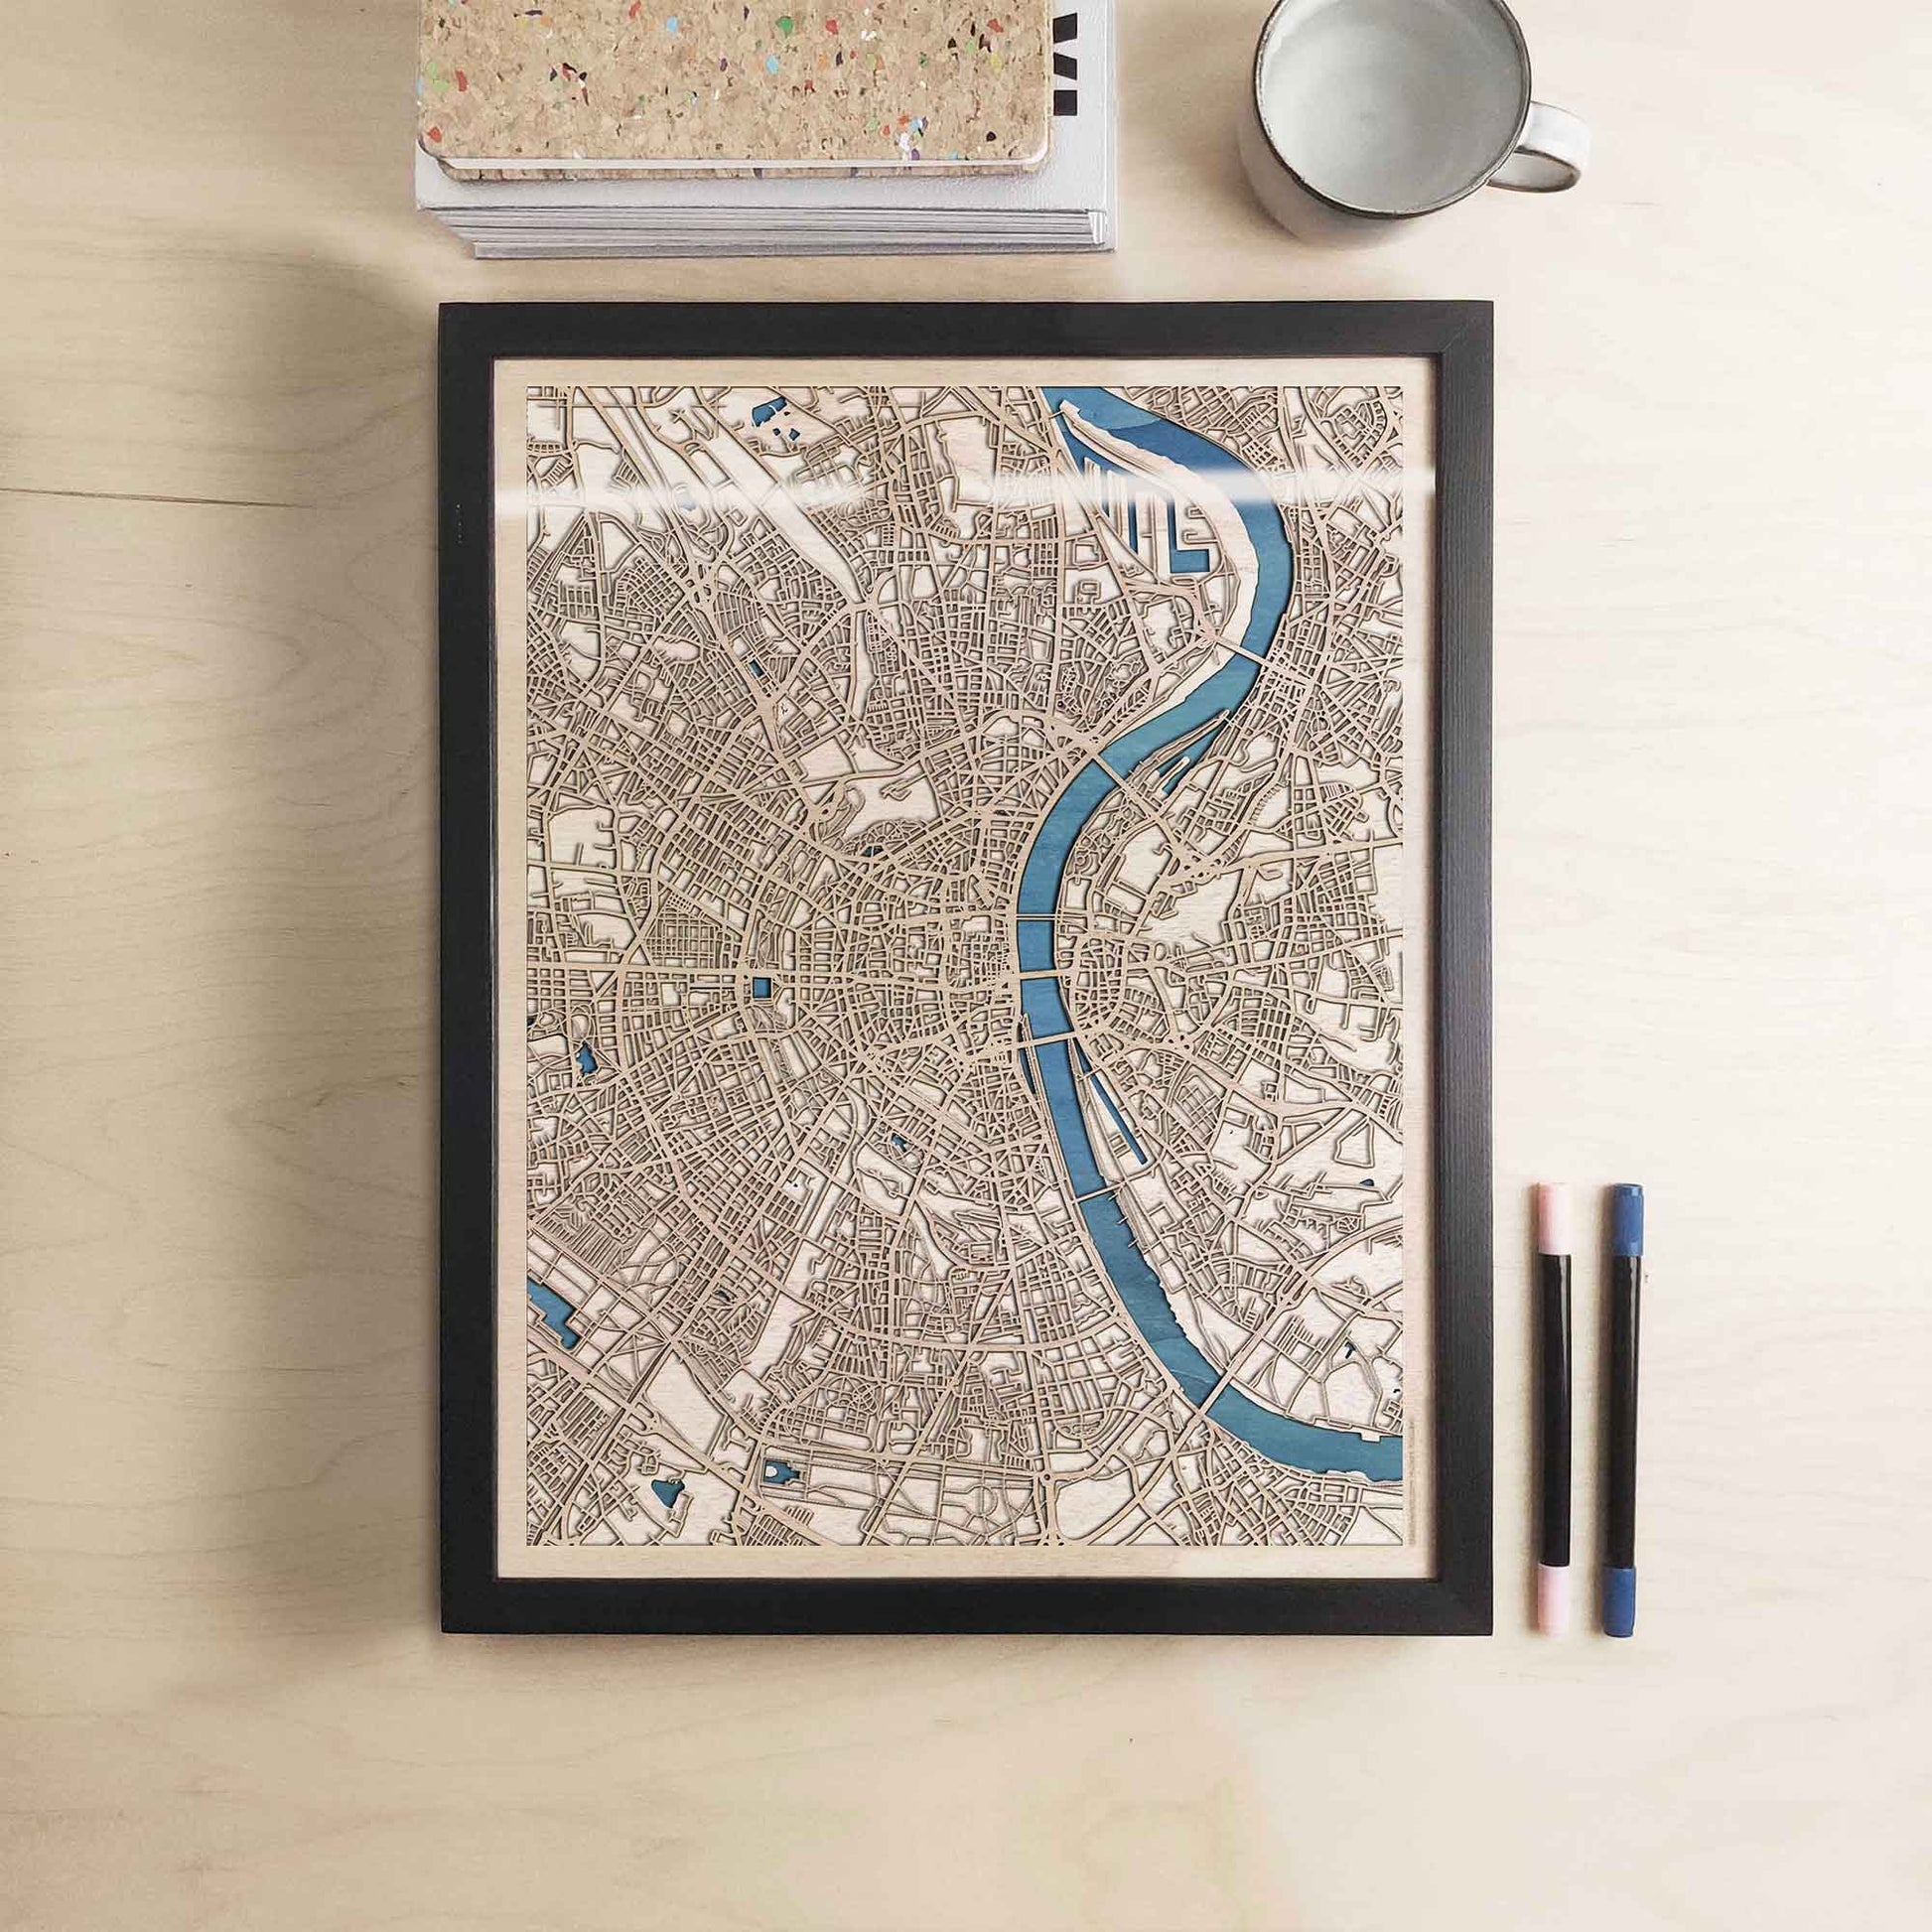 Cologne Wooden Map by CityWood - Custom Wood Map Art - Unique Laser Cut Engraved - Anniversary Gift